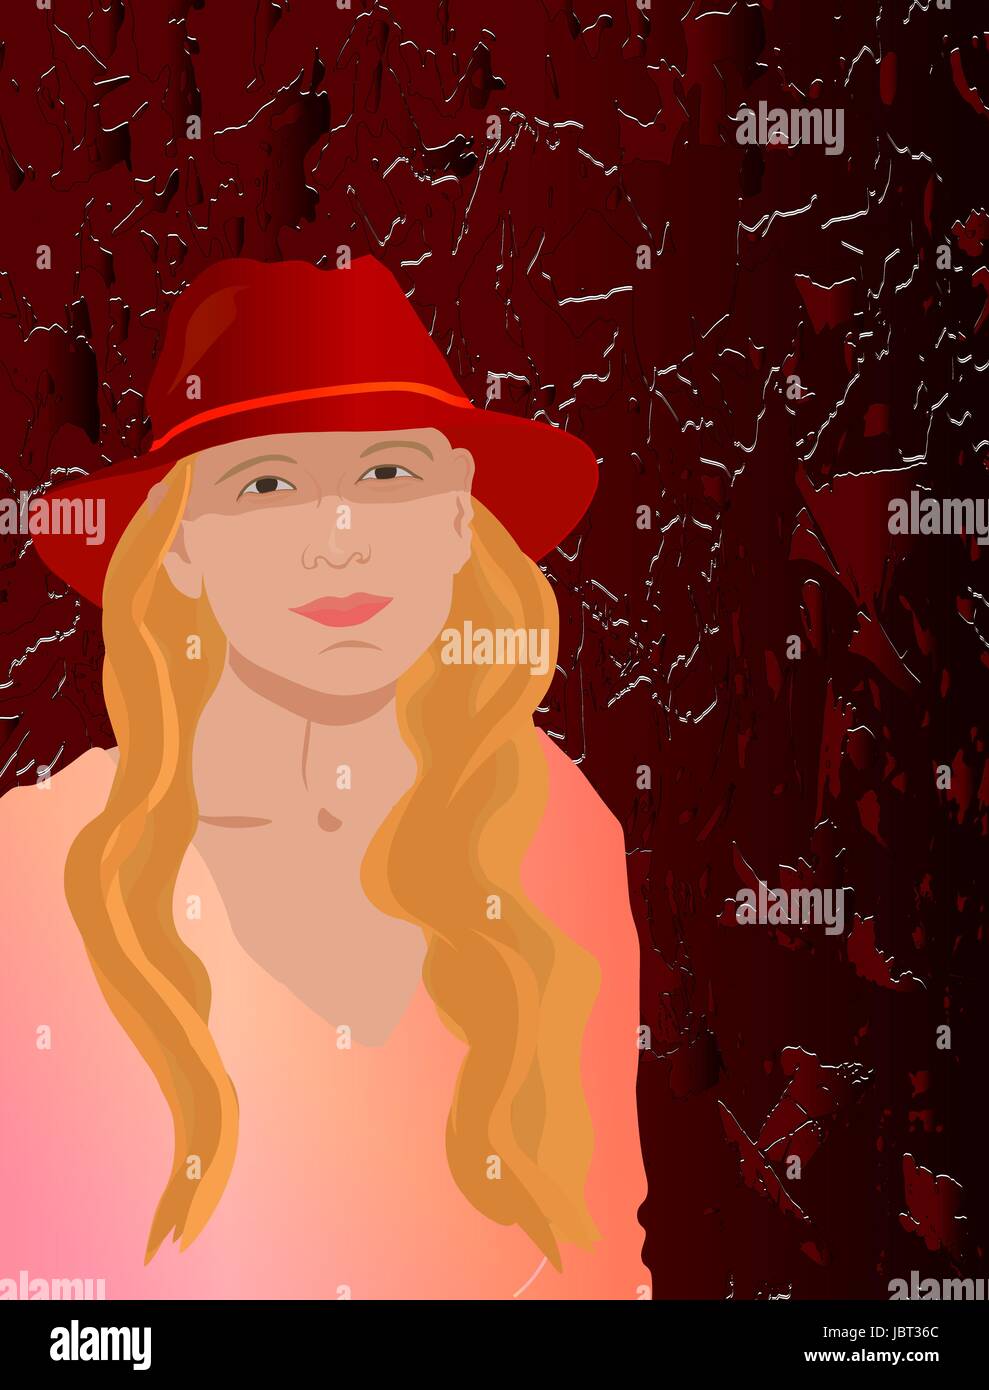 Vector illustration with girl in hat Stock Vector